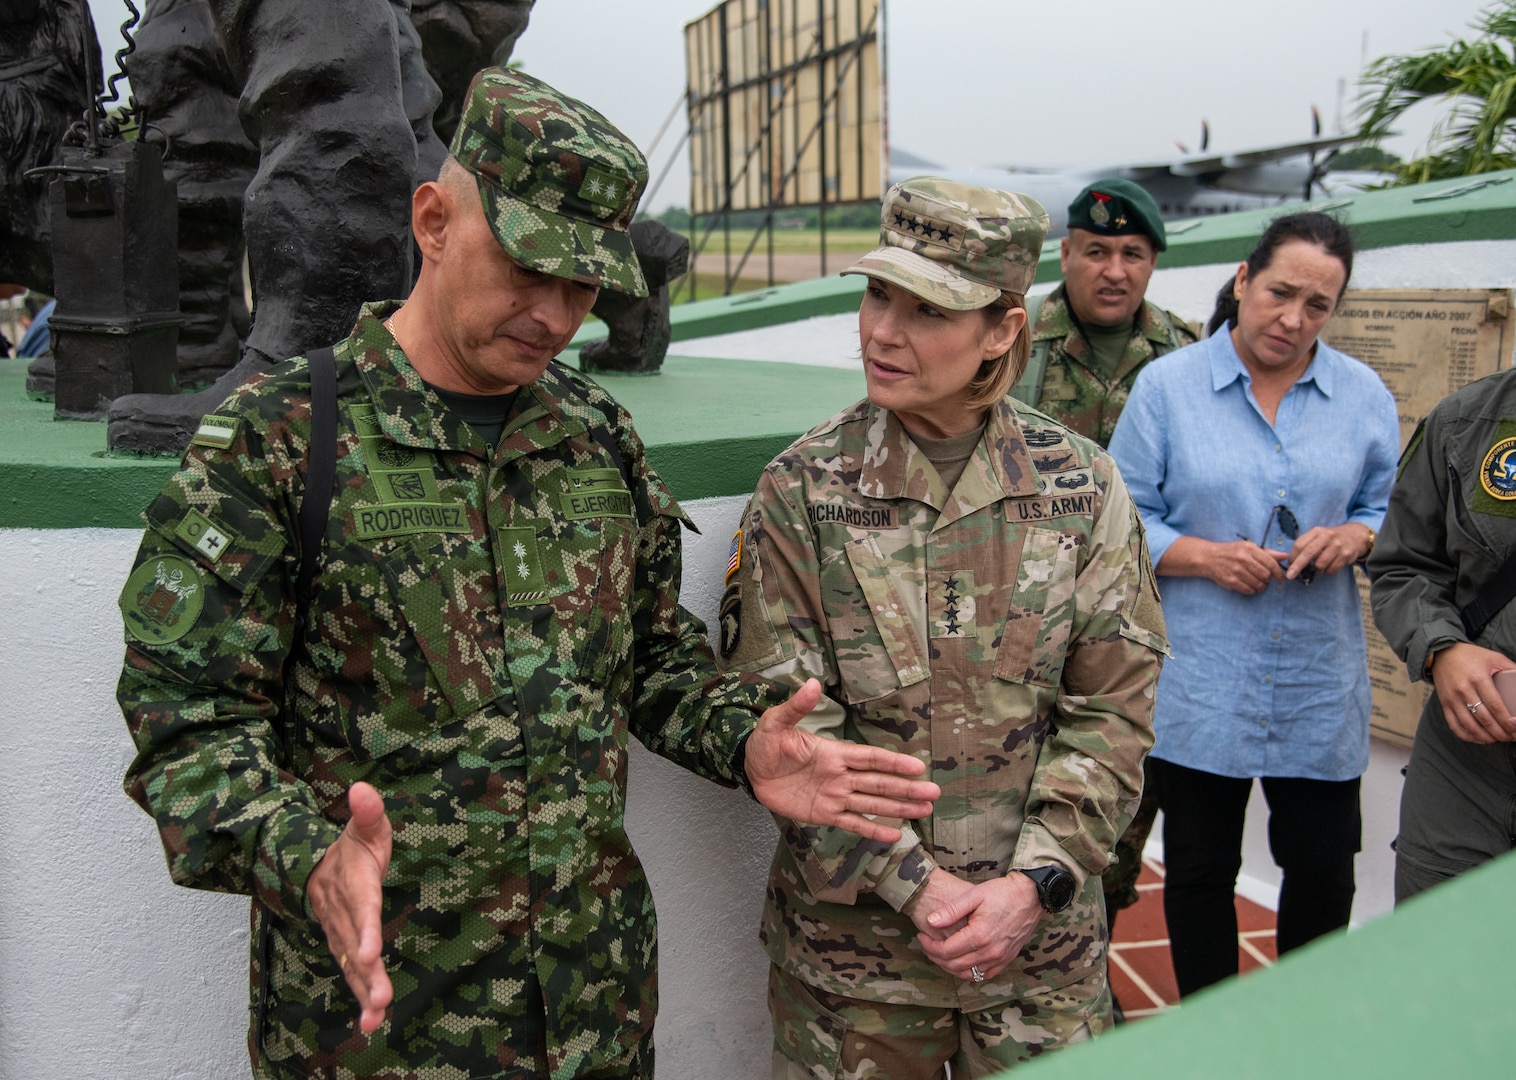 U.S. Army Gen. Laura Richardson, commander of U.S. Southern Command, meets with leaders and service members of the Colombian military’s Joint Task Force Omega.